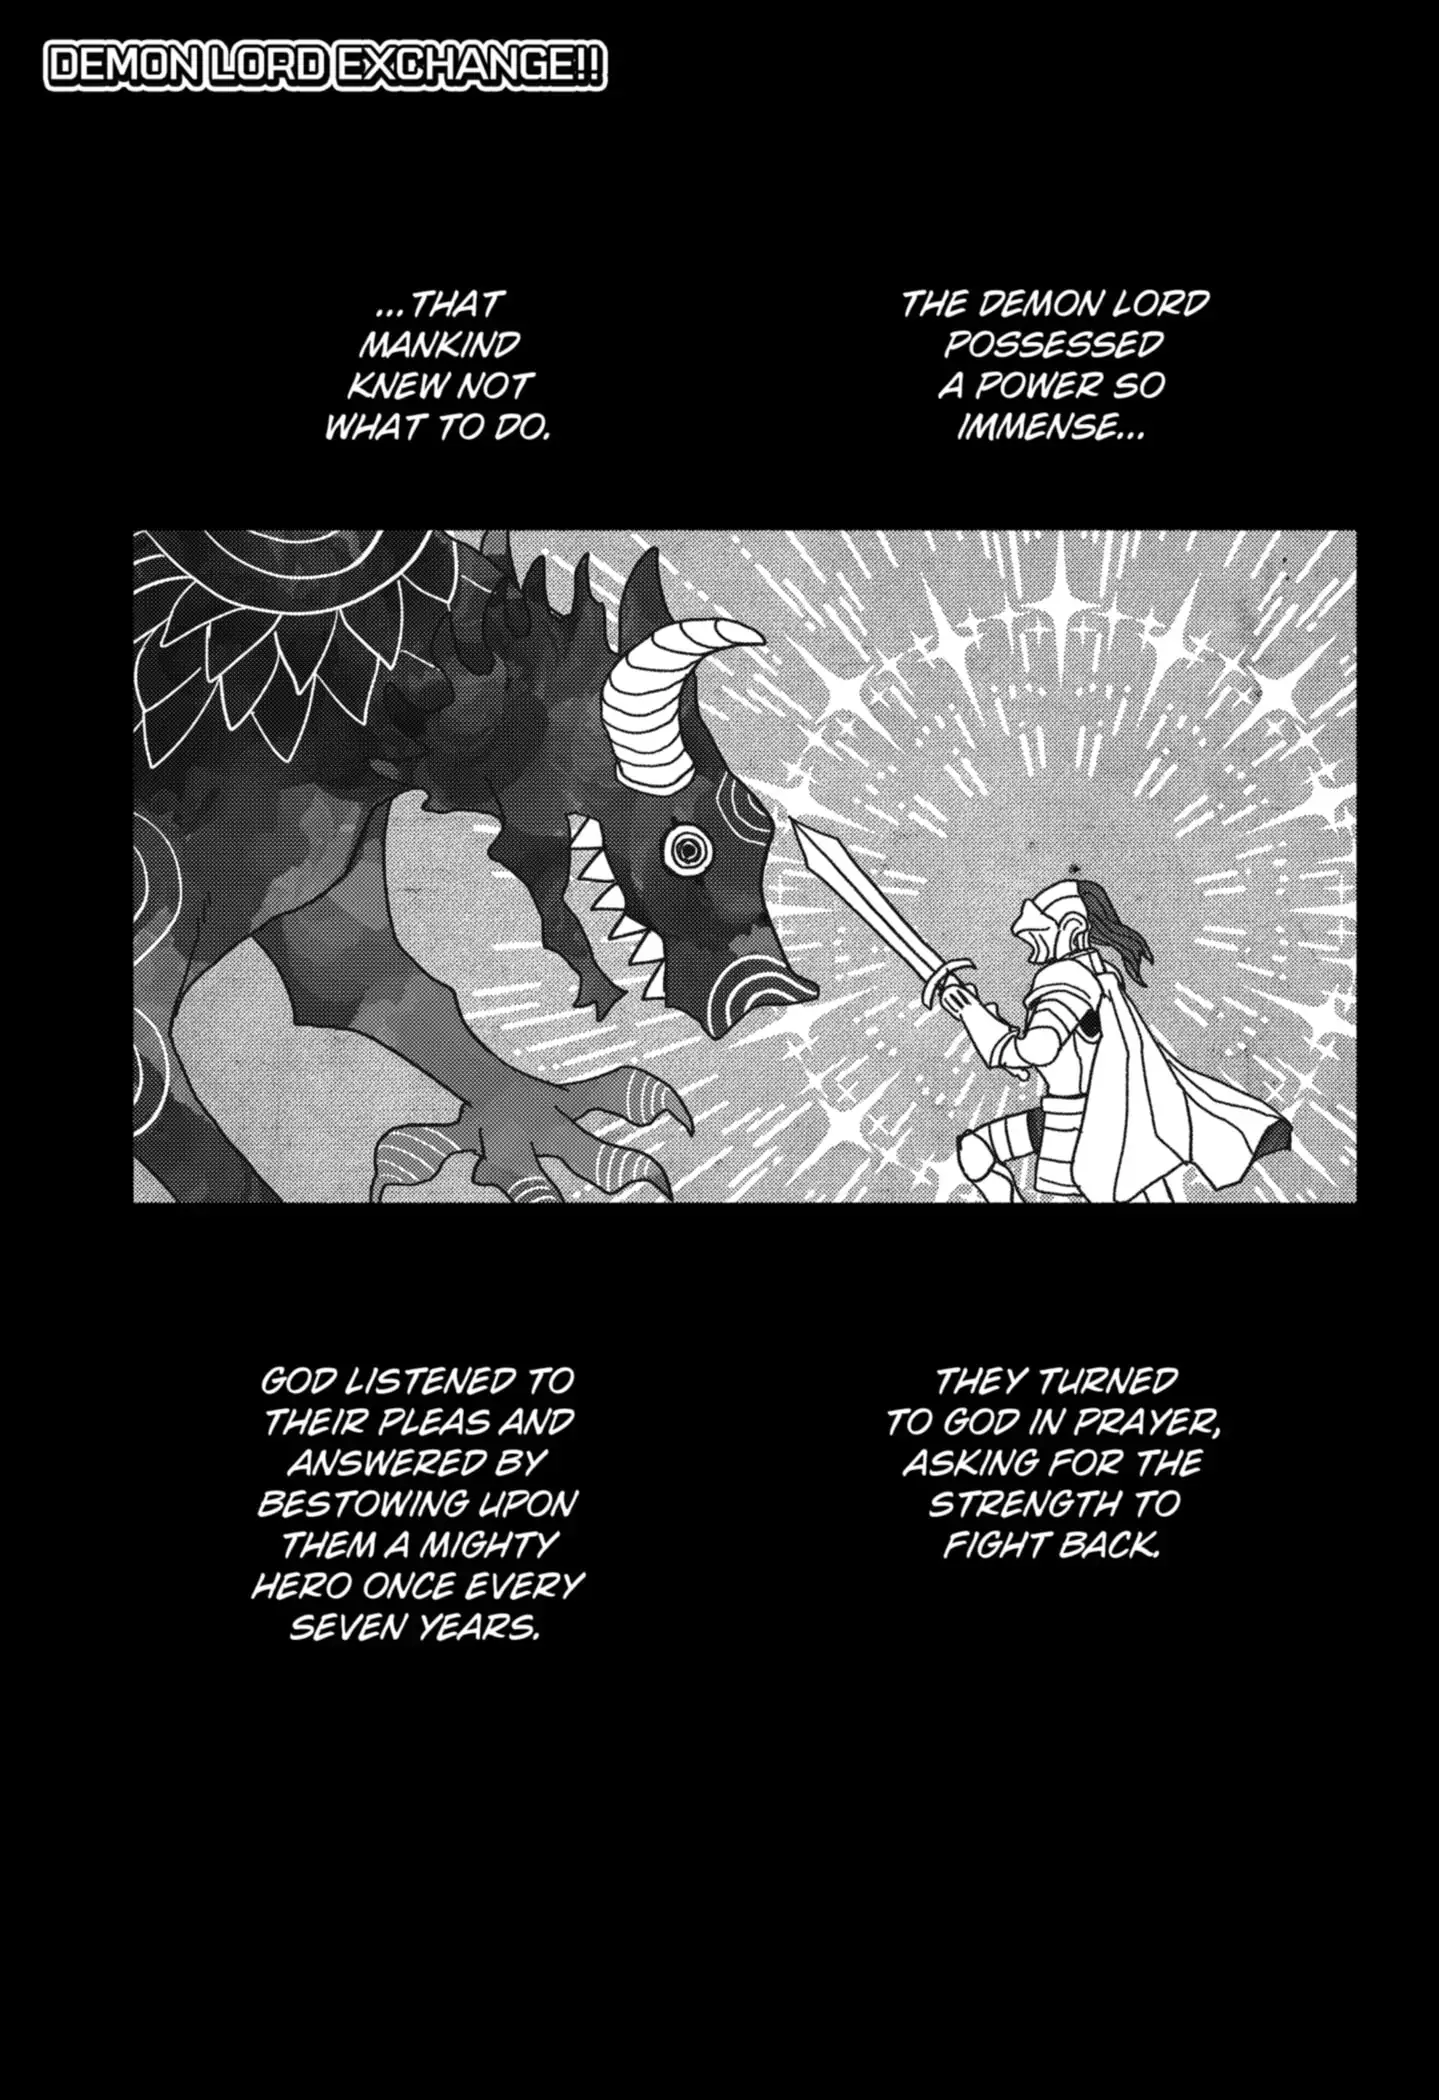 Demon Lord Exchange!! - 13 page 1-c7784cdf